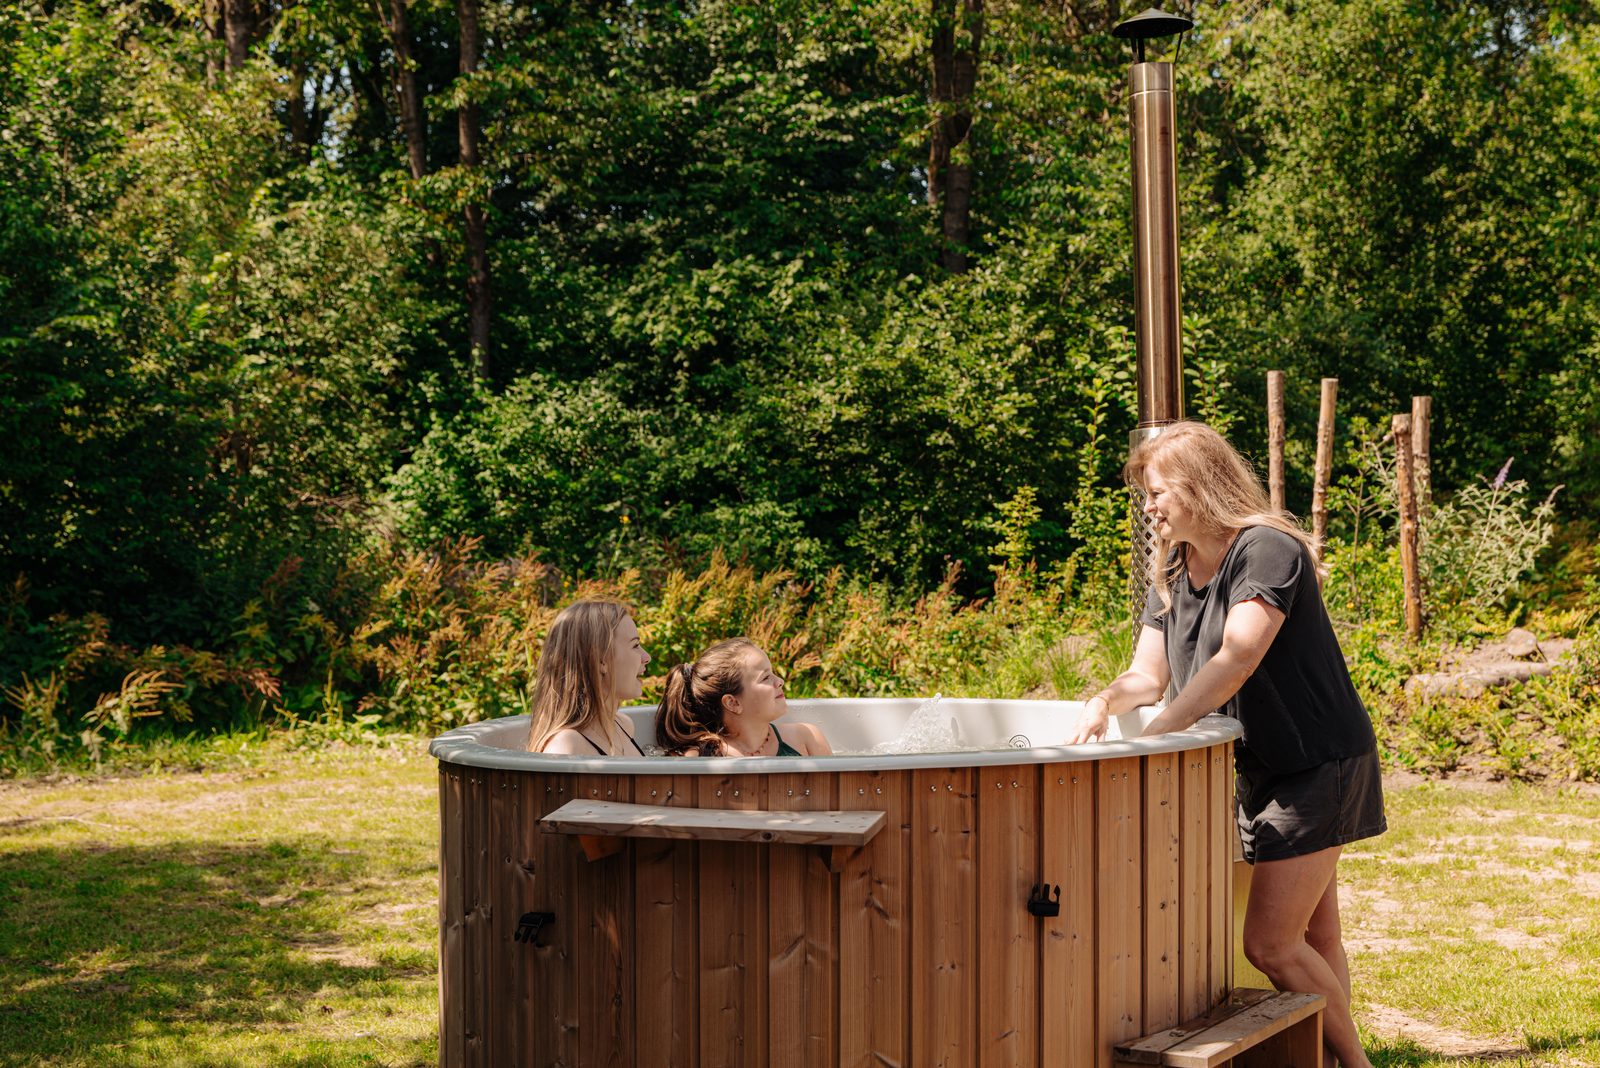 Relax in a wood-fired hot tub